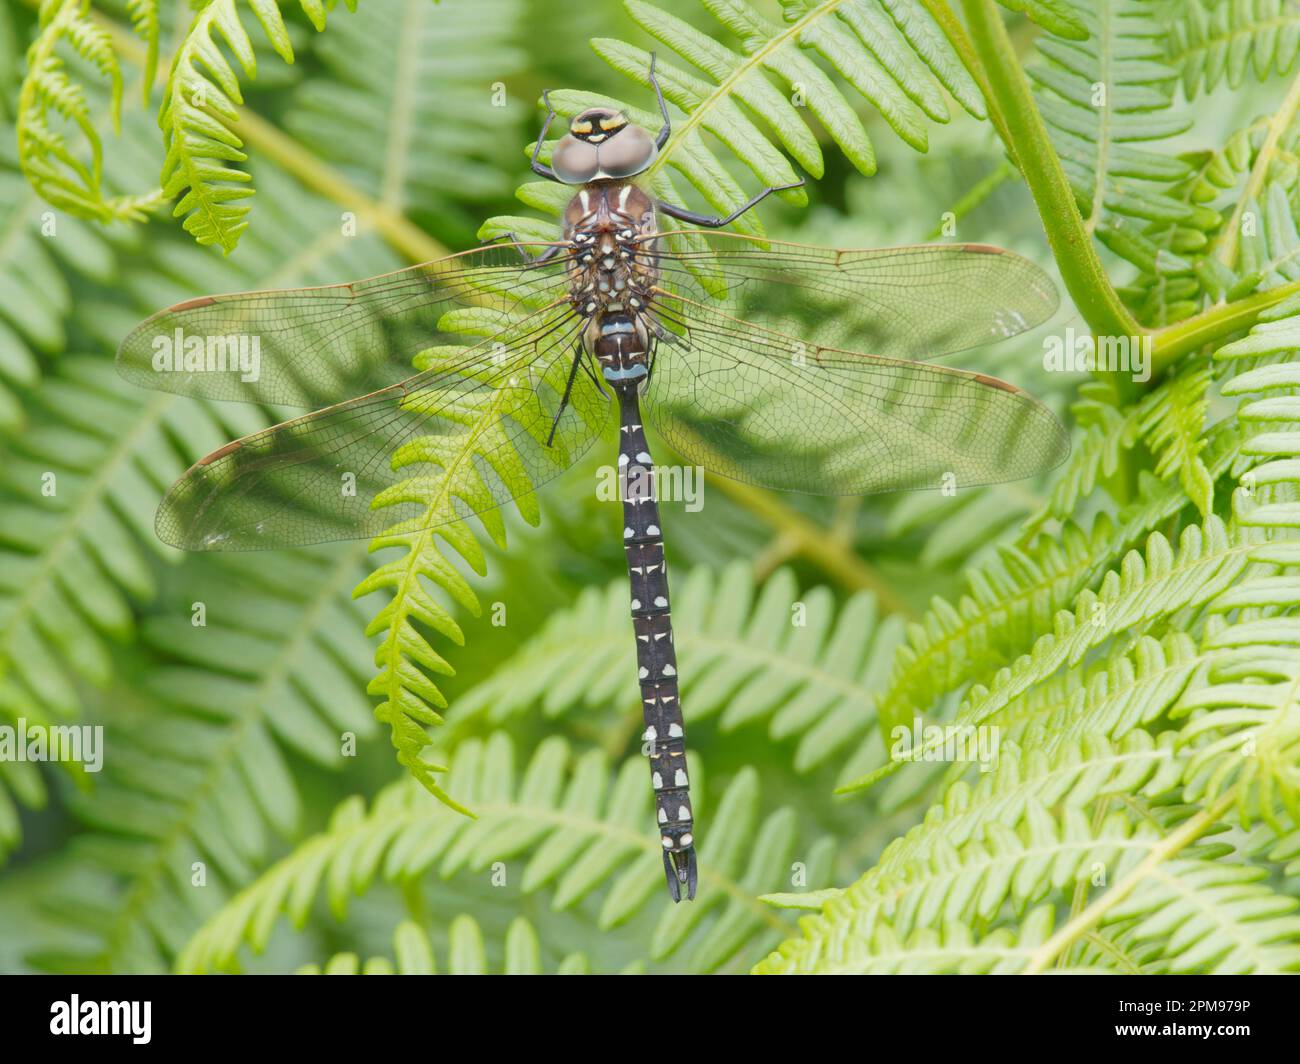 Common Hawker Dragonfly Aeshna juncea Beinn Eighe, Écosse, Royaume-Uni IN004178 Banque D'Images